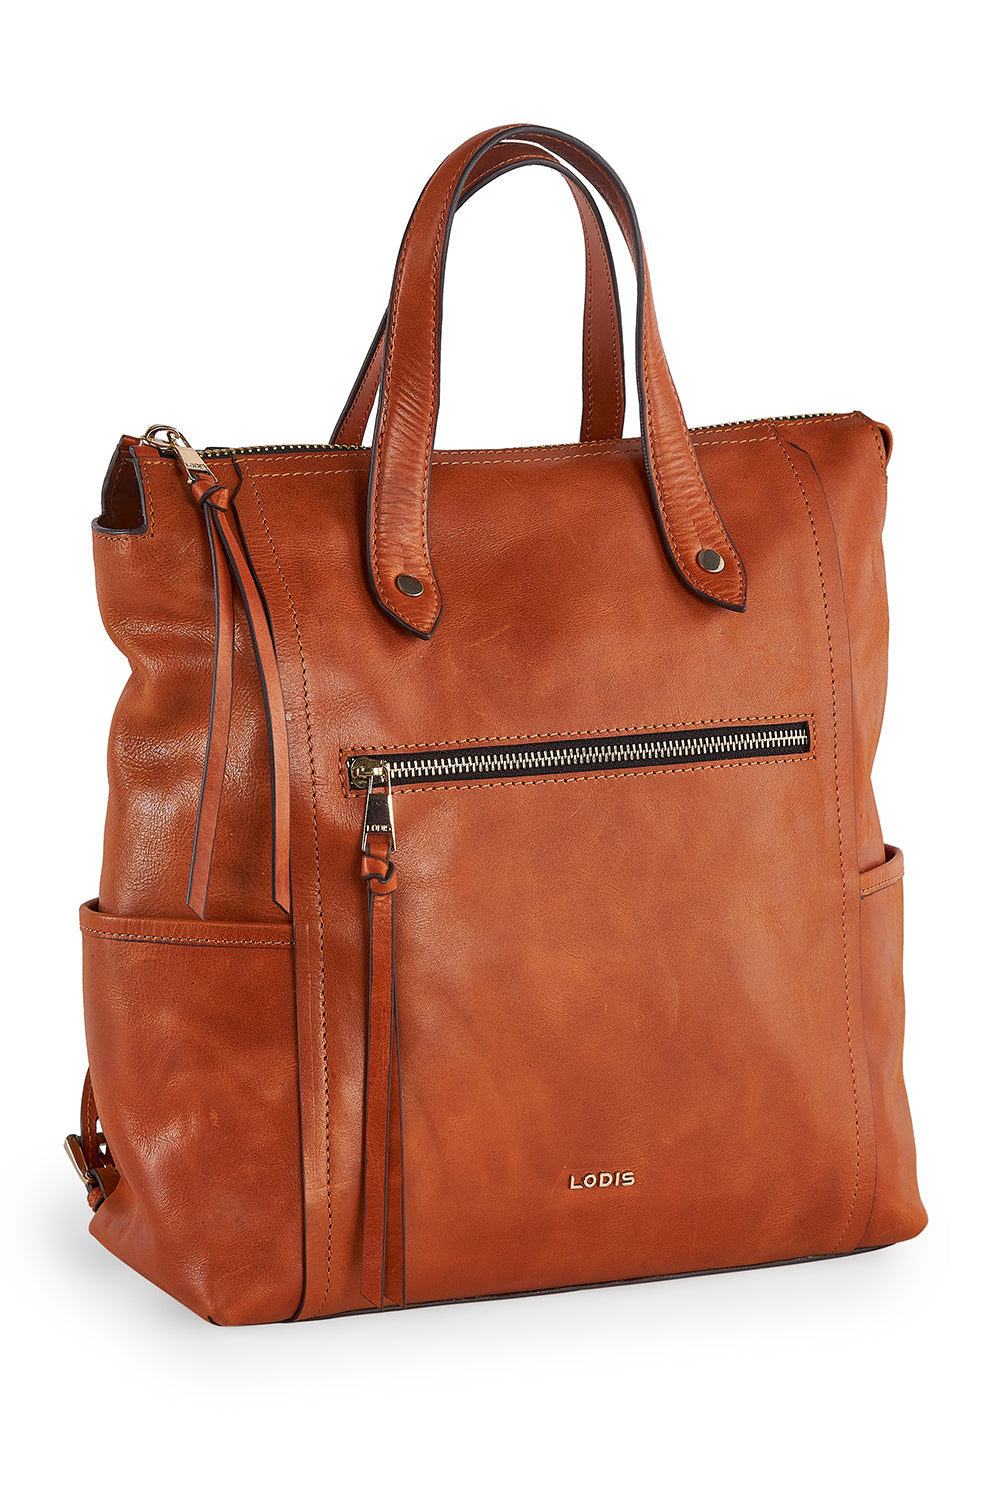 Shop Now The Ultimate he Versatile Catalina Backpack  | Lodis 